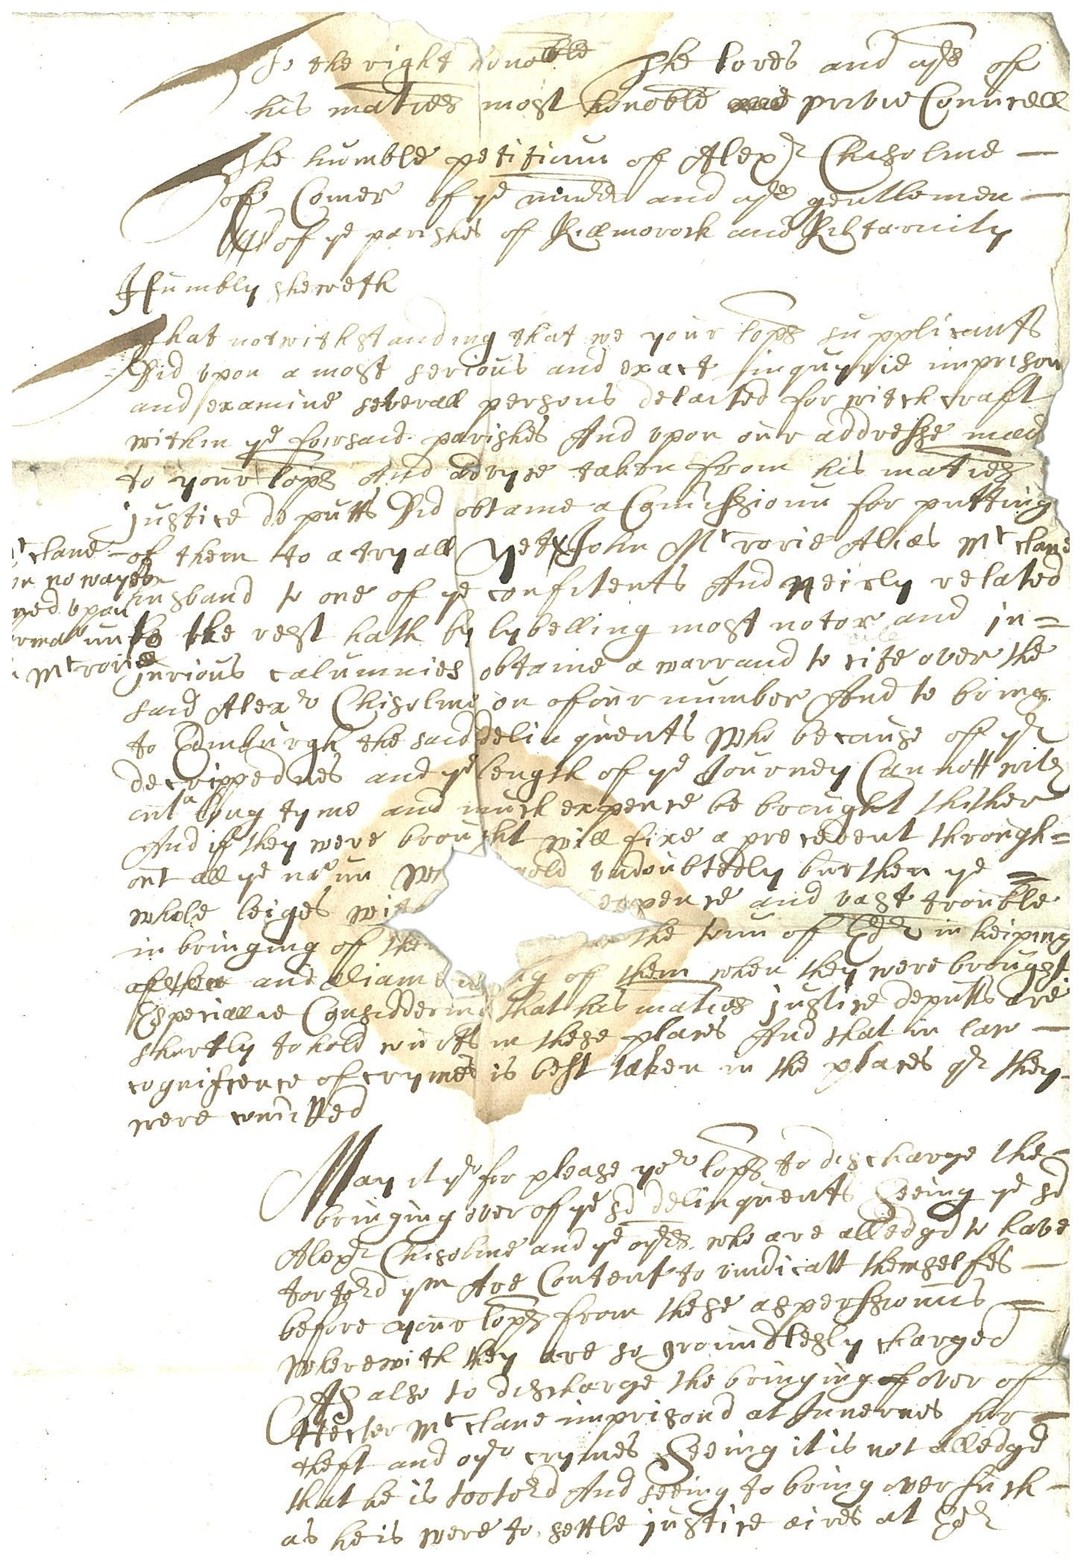 Draft petition by Alexander Chisolme to the Privy Council against having to produce the witches in Edinburgh, 1662.